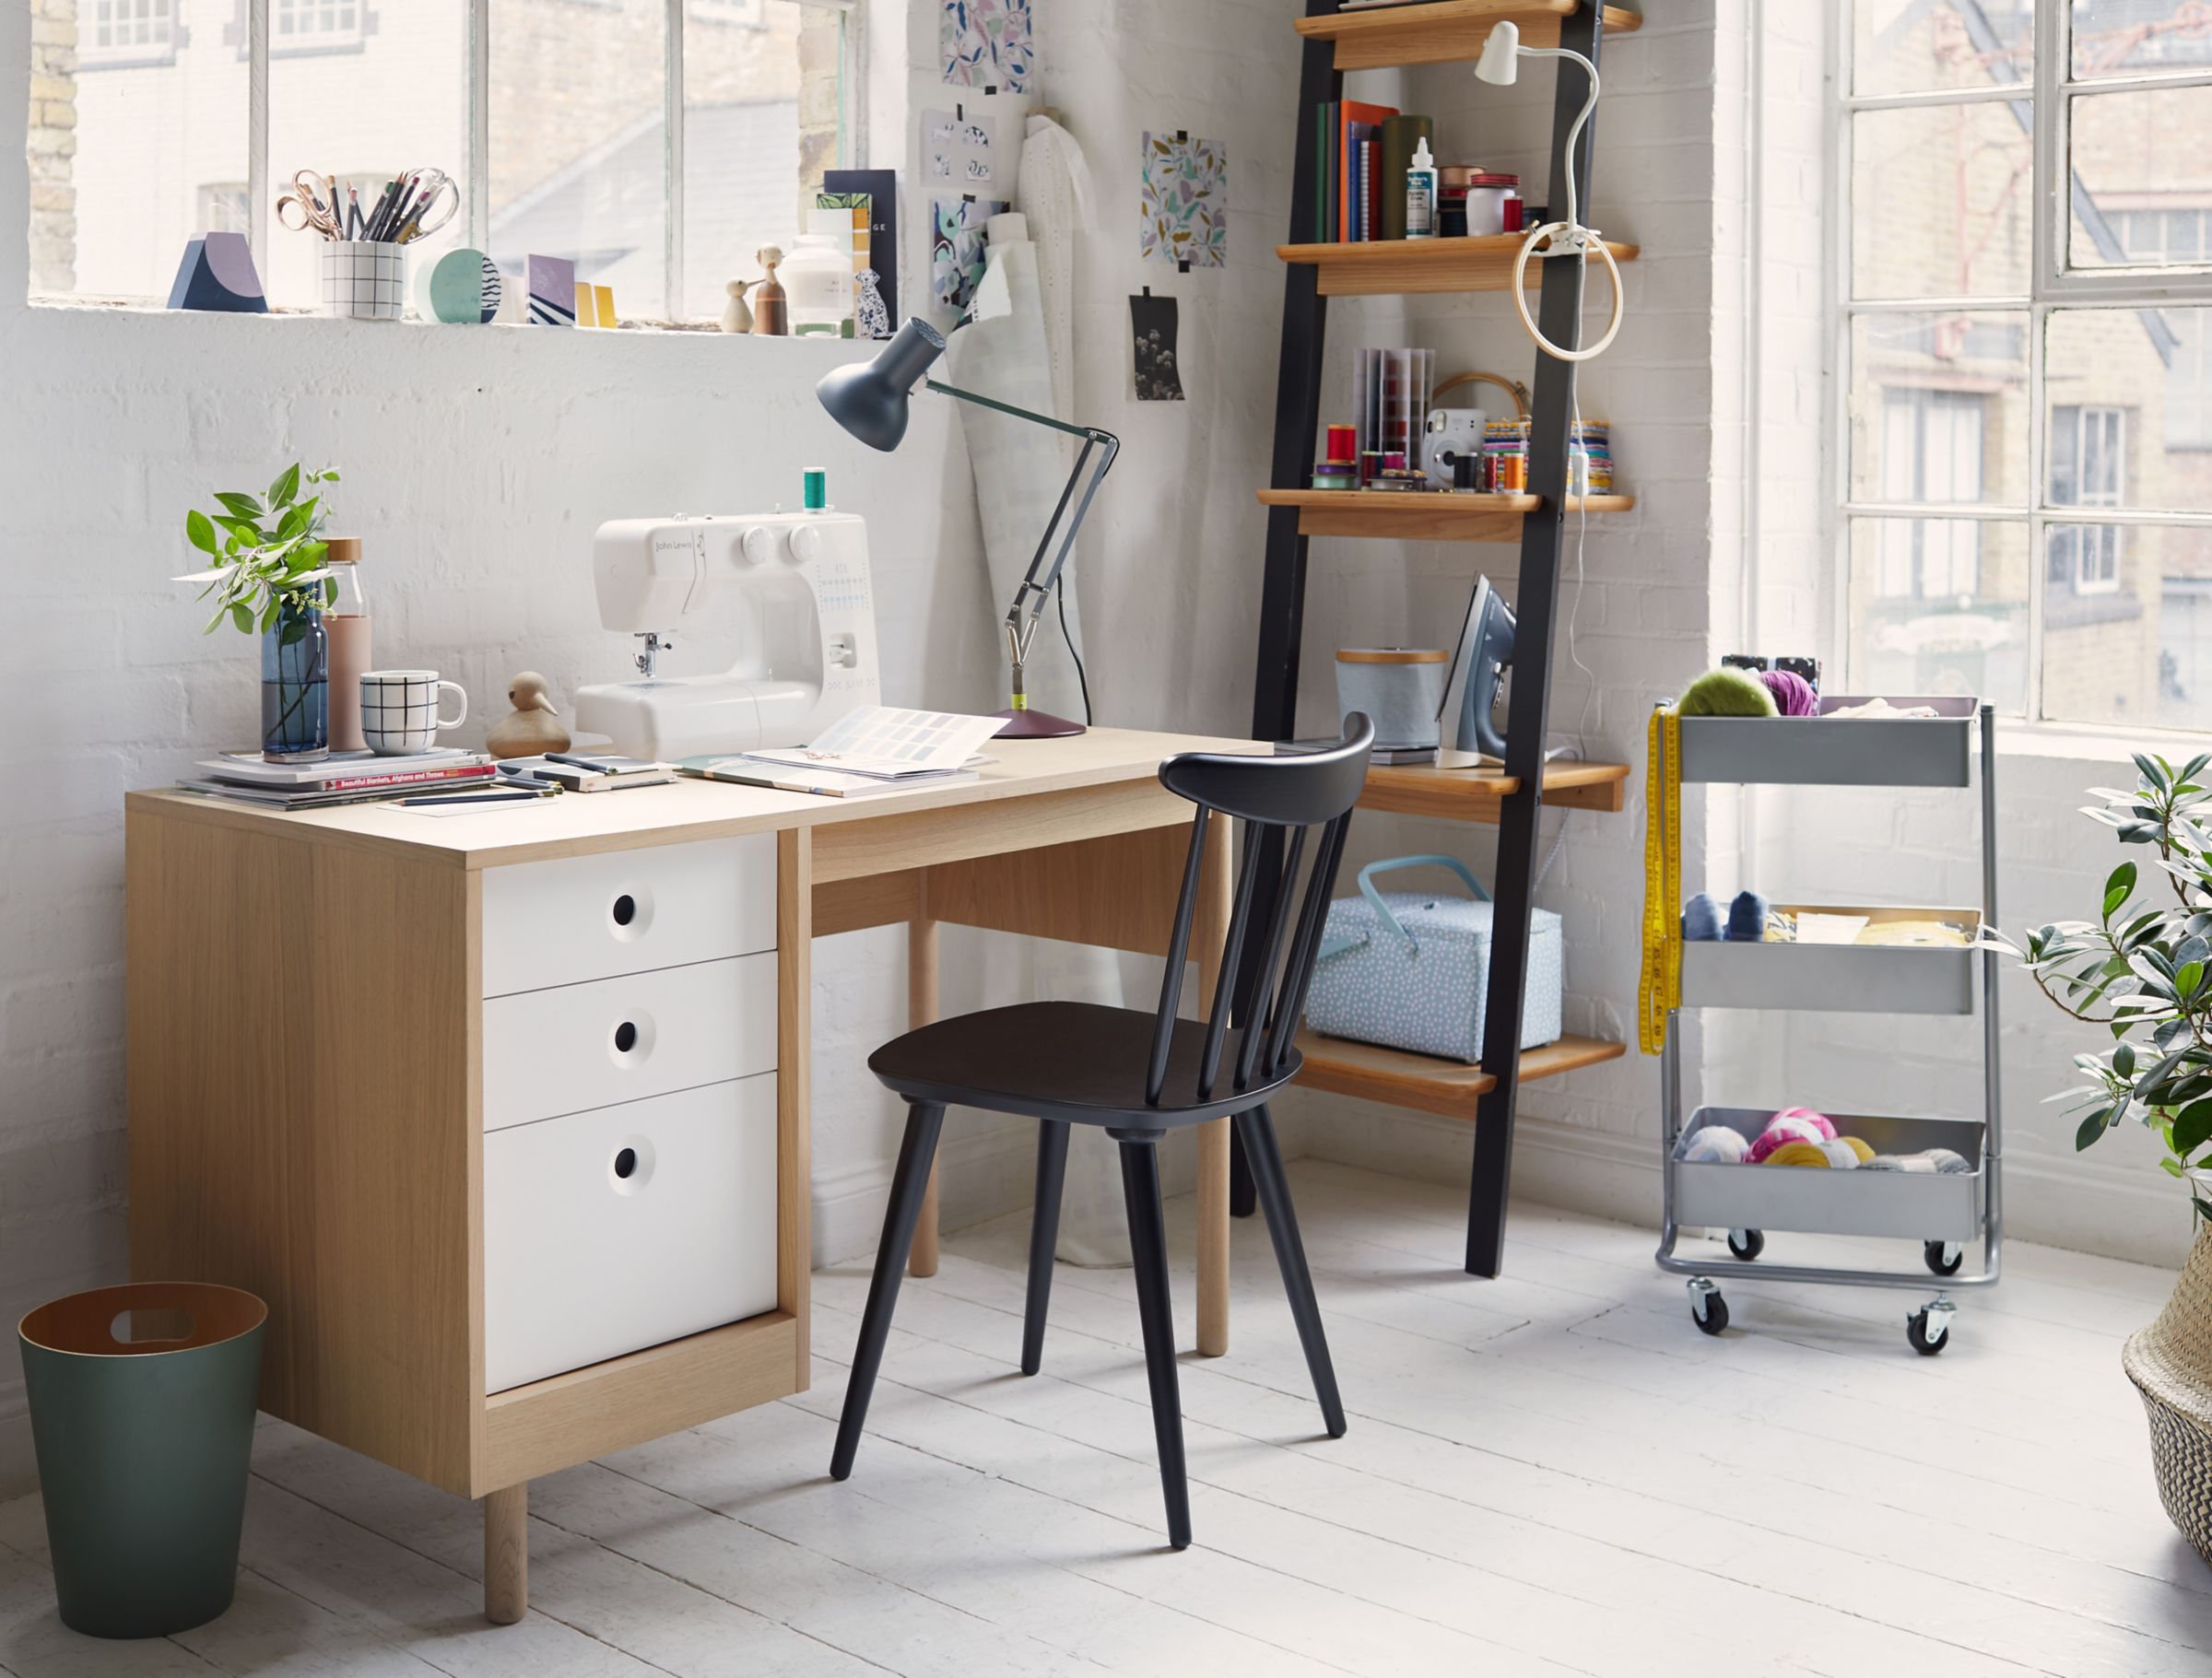 Get creative with your crafting space